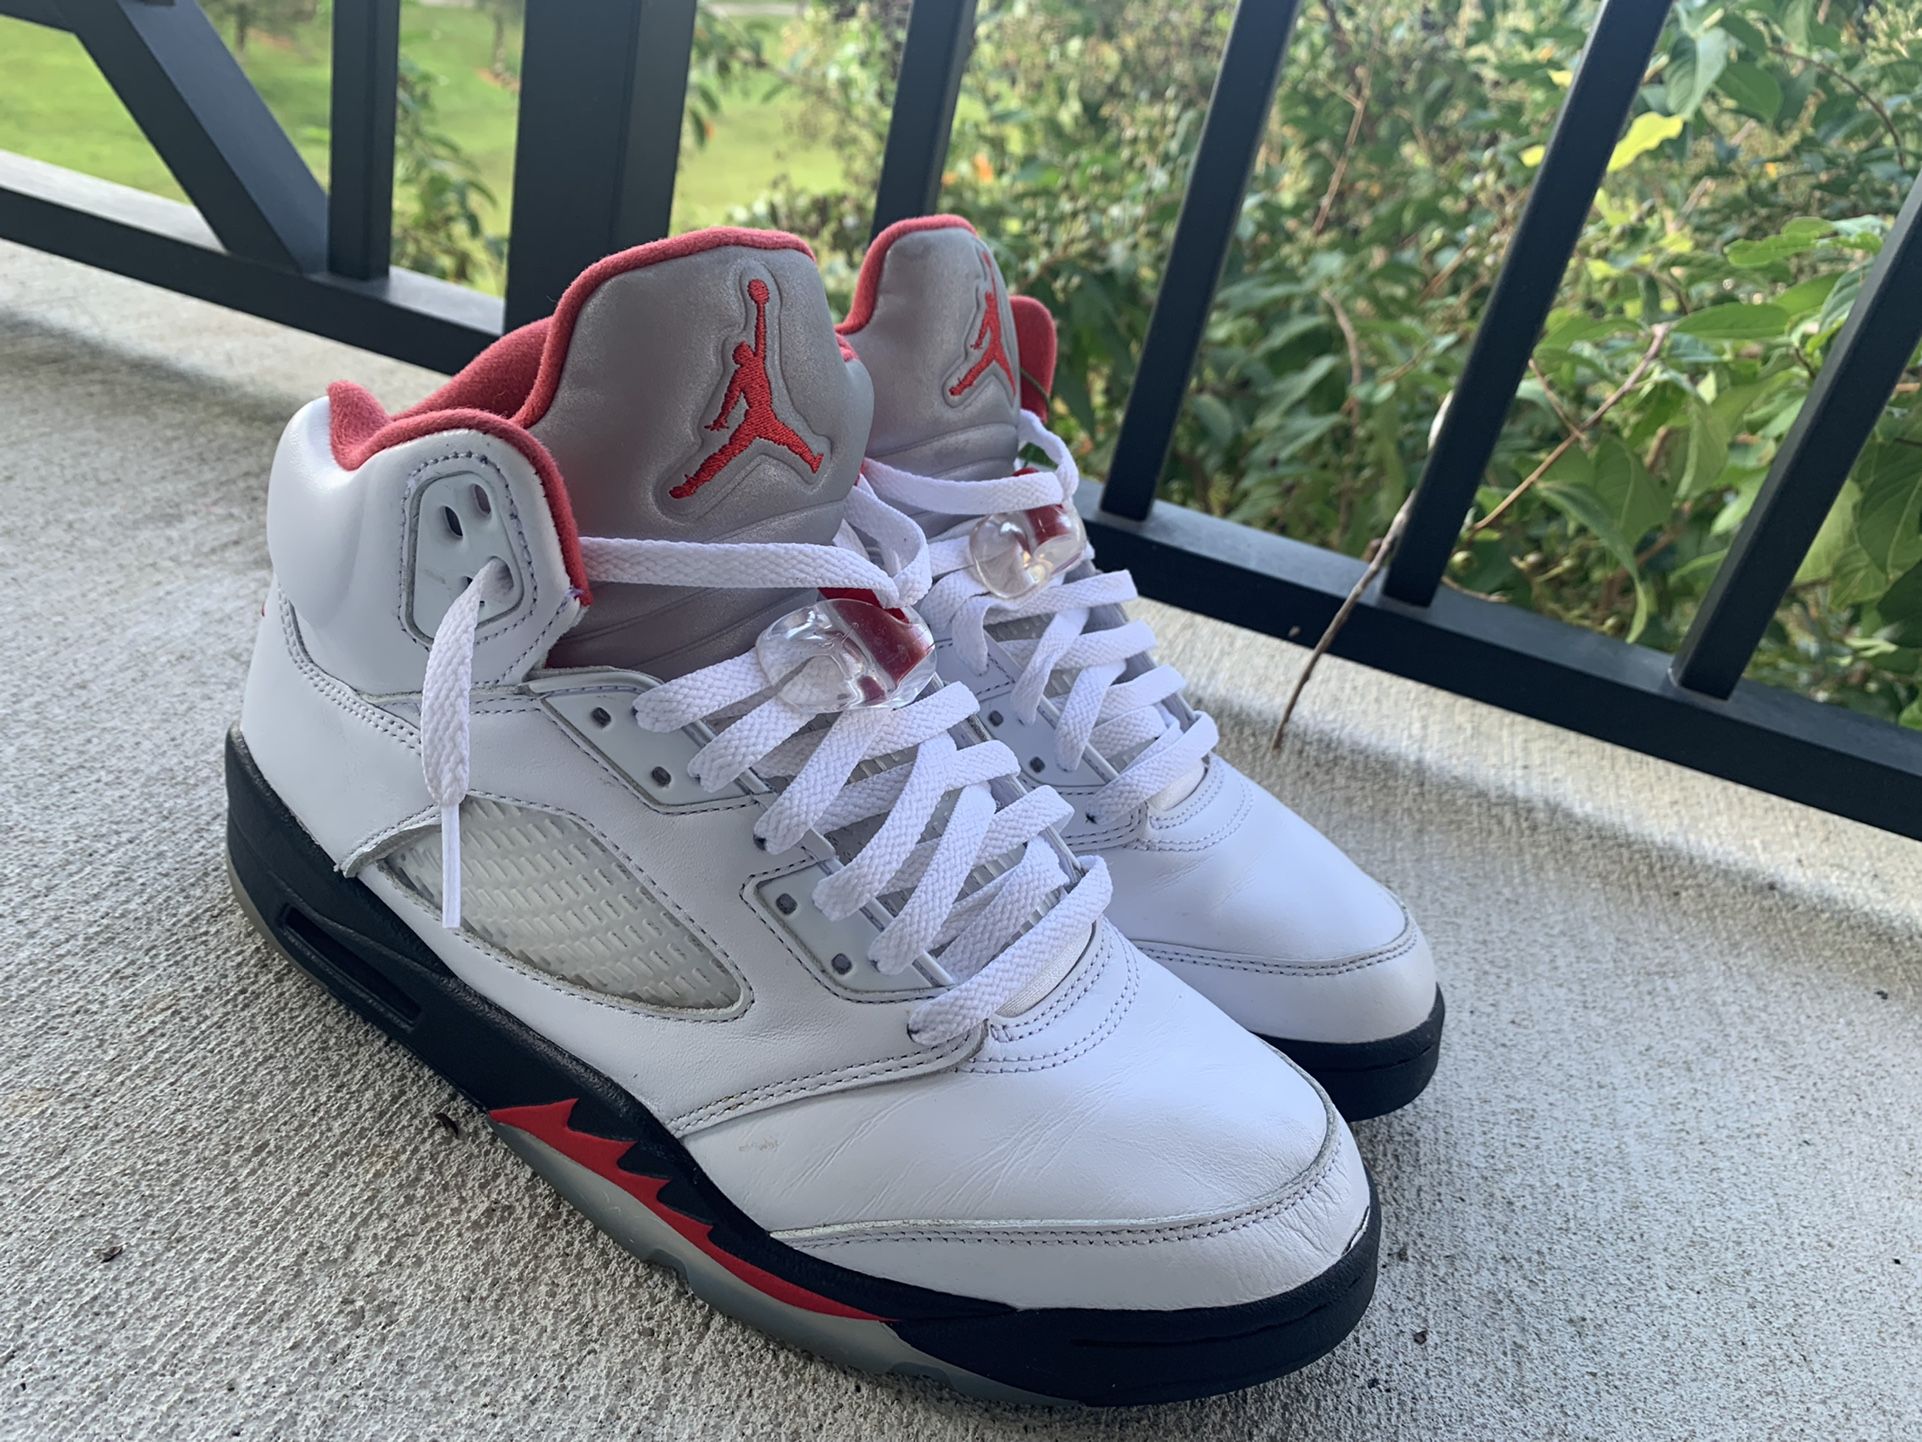 Fire Red 5s